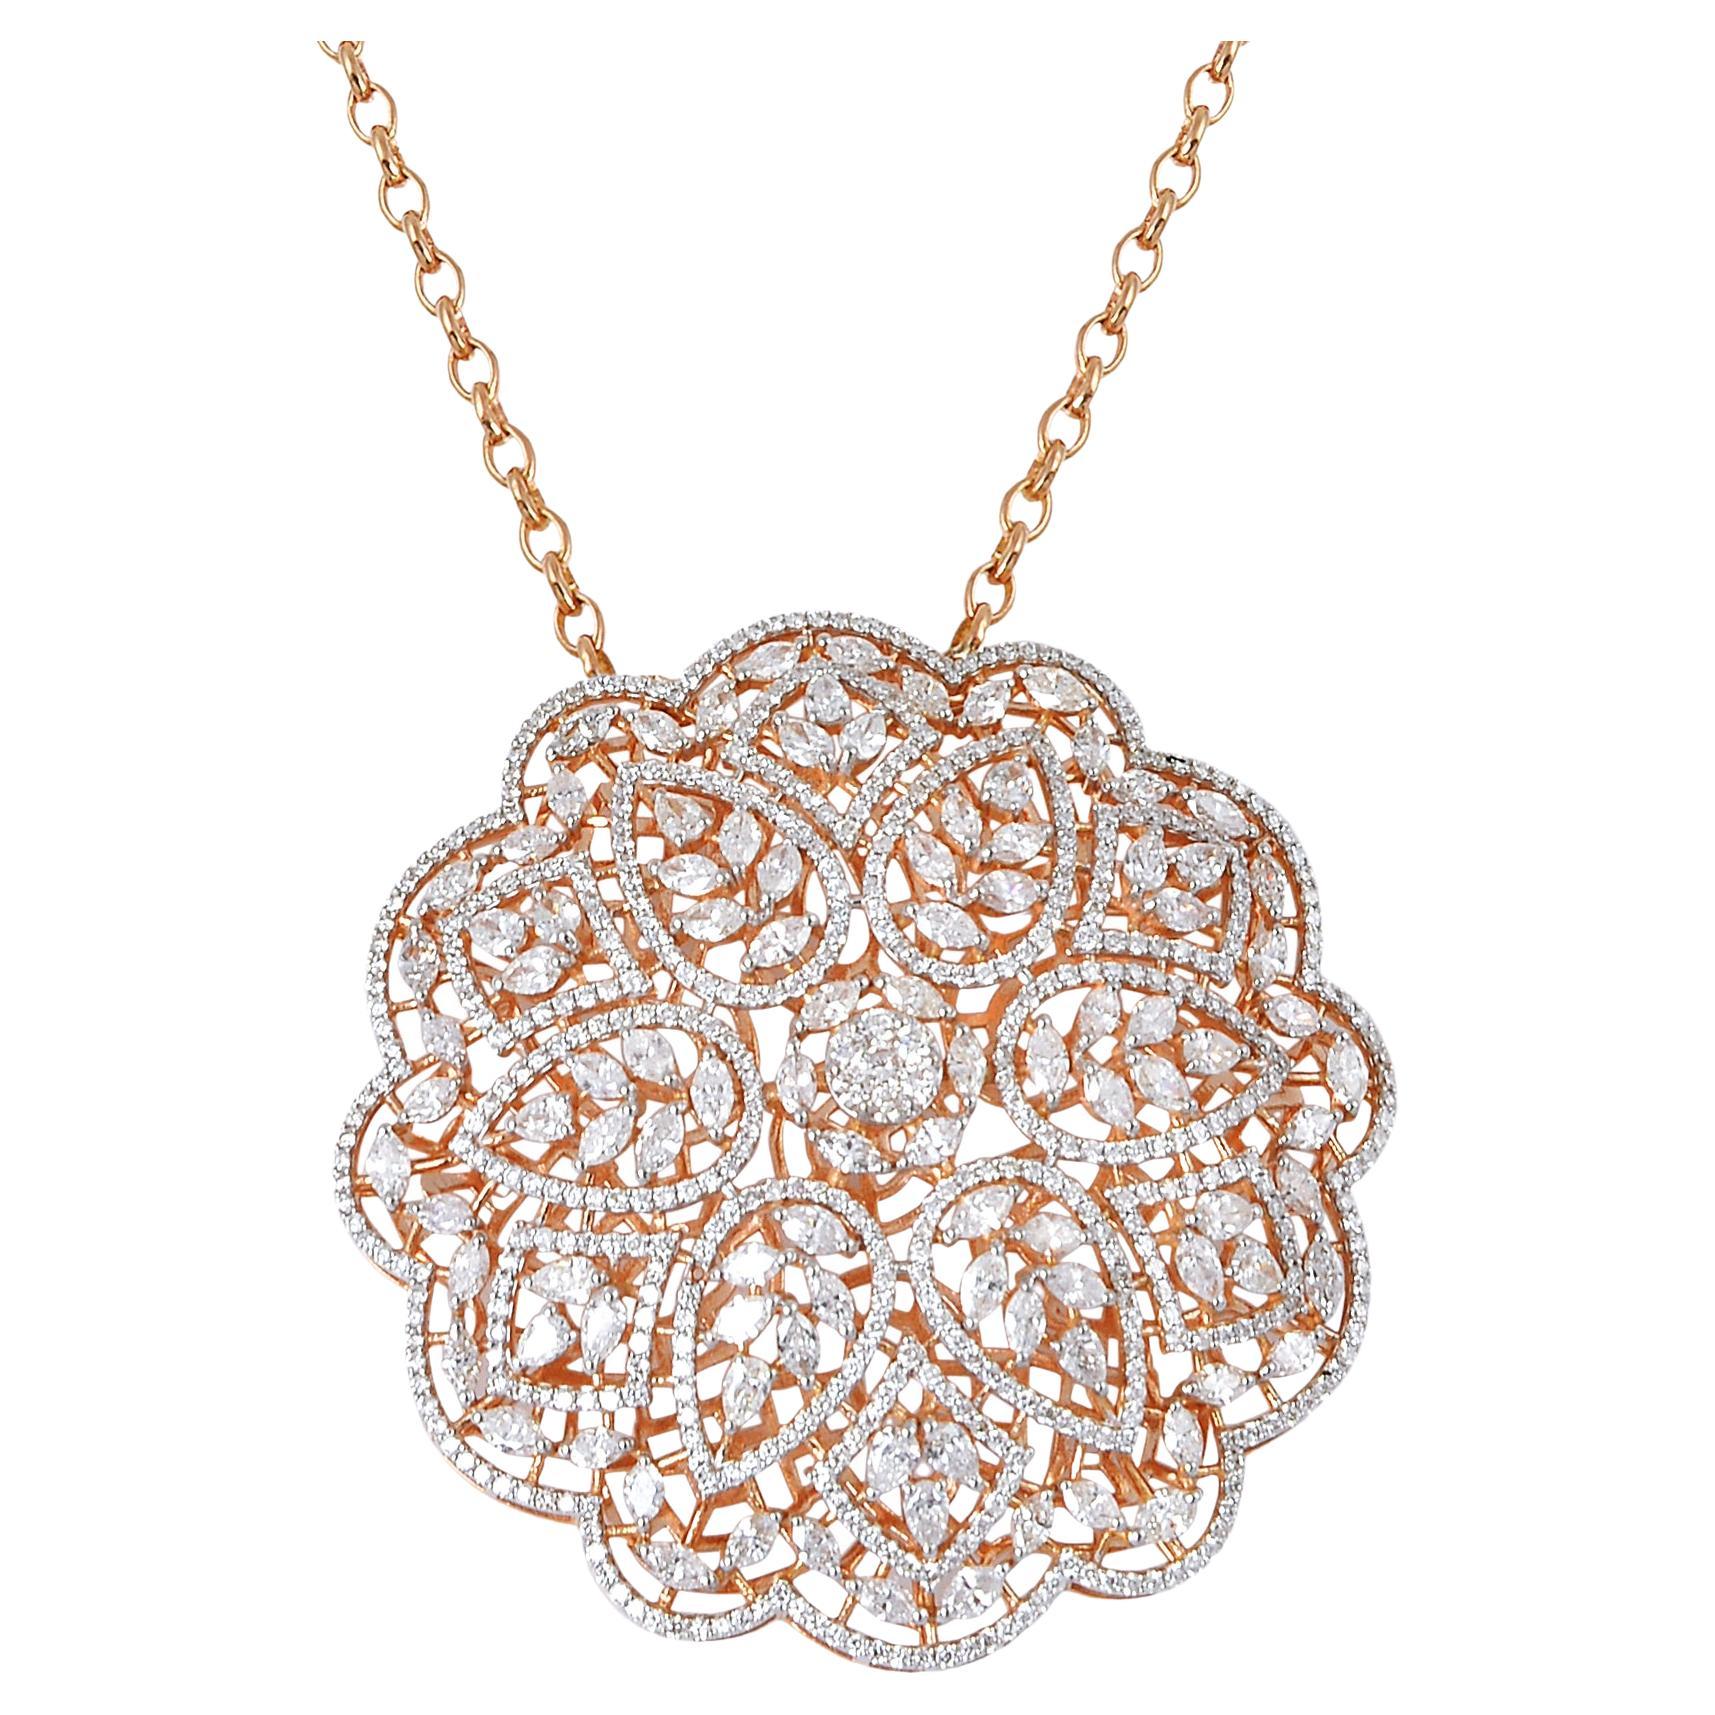 This necklace is designed to be worn with grace and elegance, adding a touch of glamour to any outfit. The pendant hangs delicately from a rose gold chain, creating a harmonious and eye-catching ensemble. Whether worn for a special occasion, a